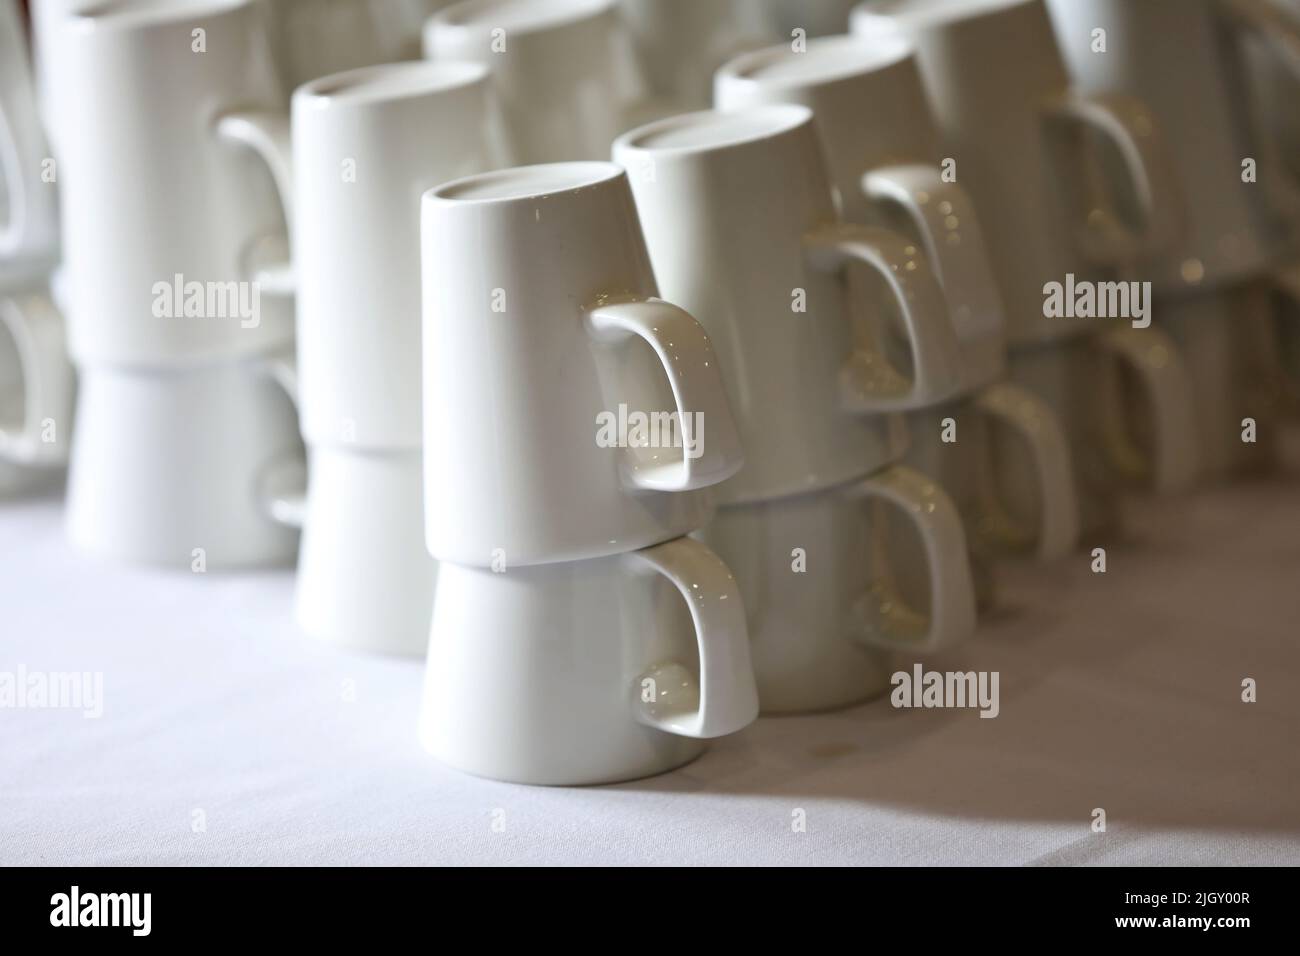 https://c8.alamy.com/comp/2JGY00R/general-views-of-mugs-and-cups-and-saucers-in-a-hotel-in-sussex-uk-2JGY00R.jpg